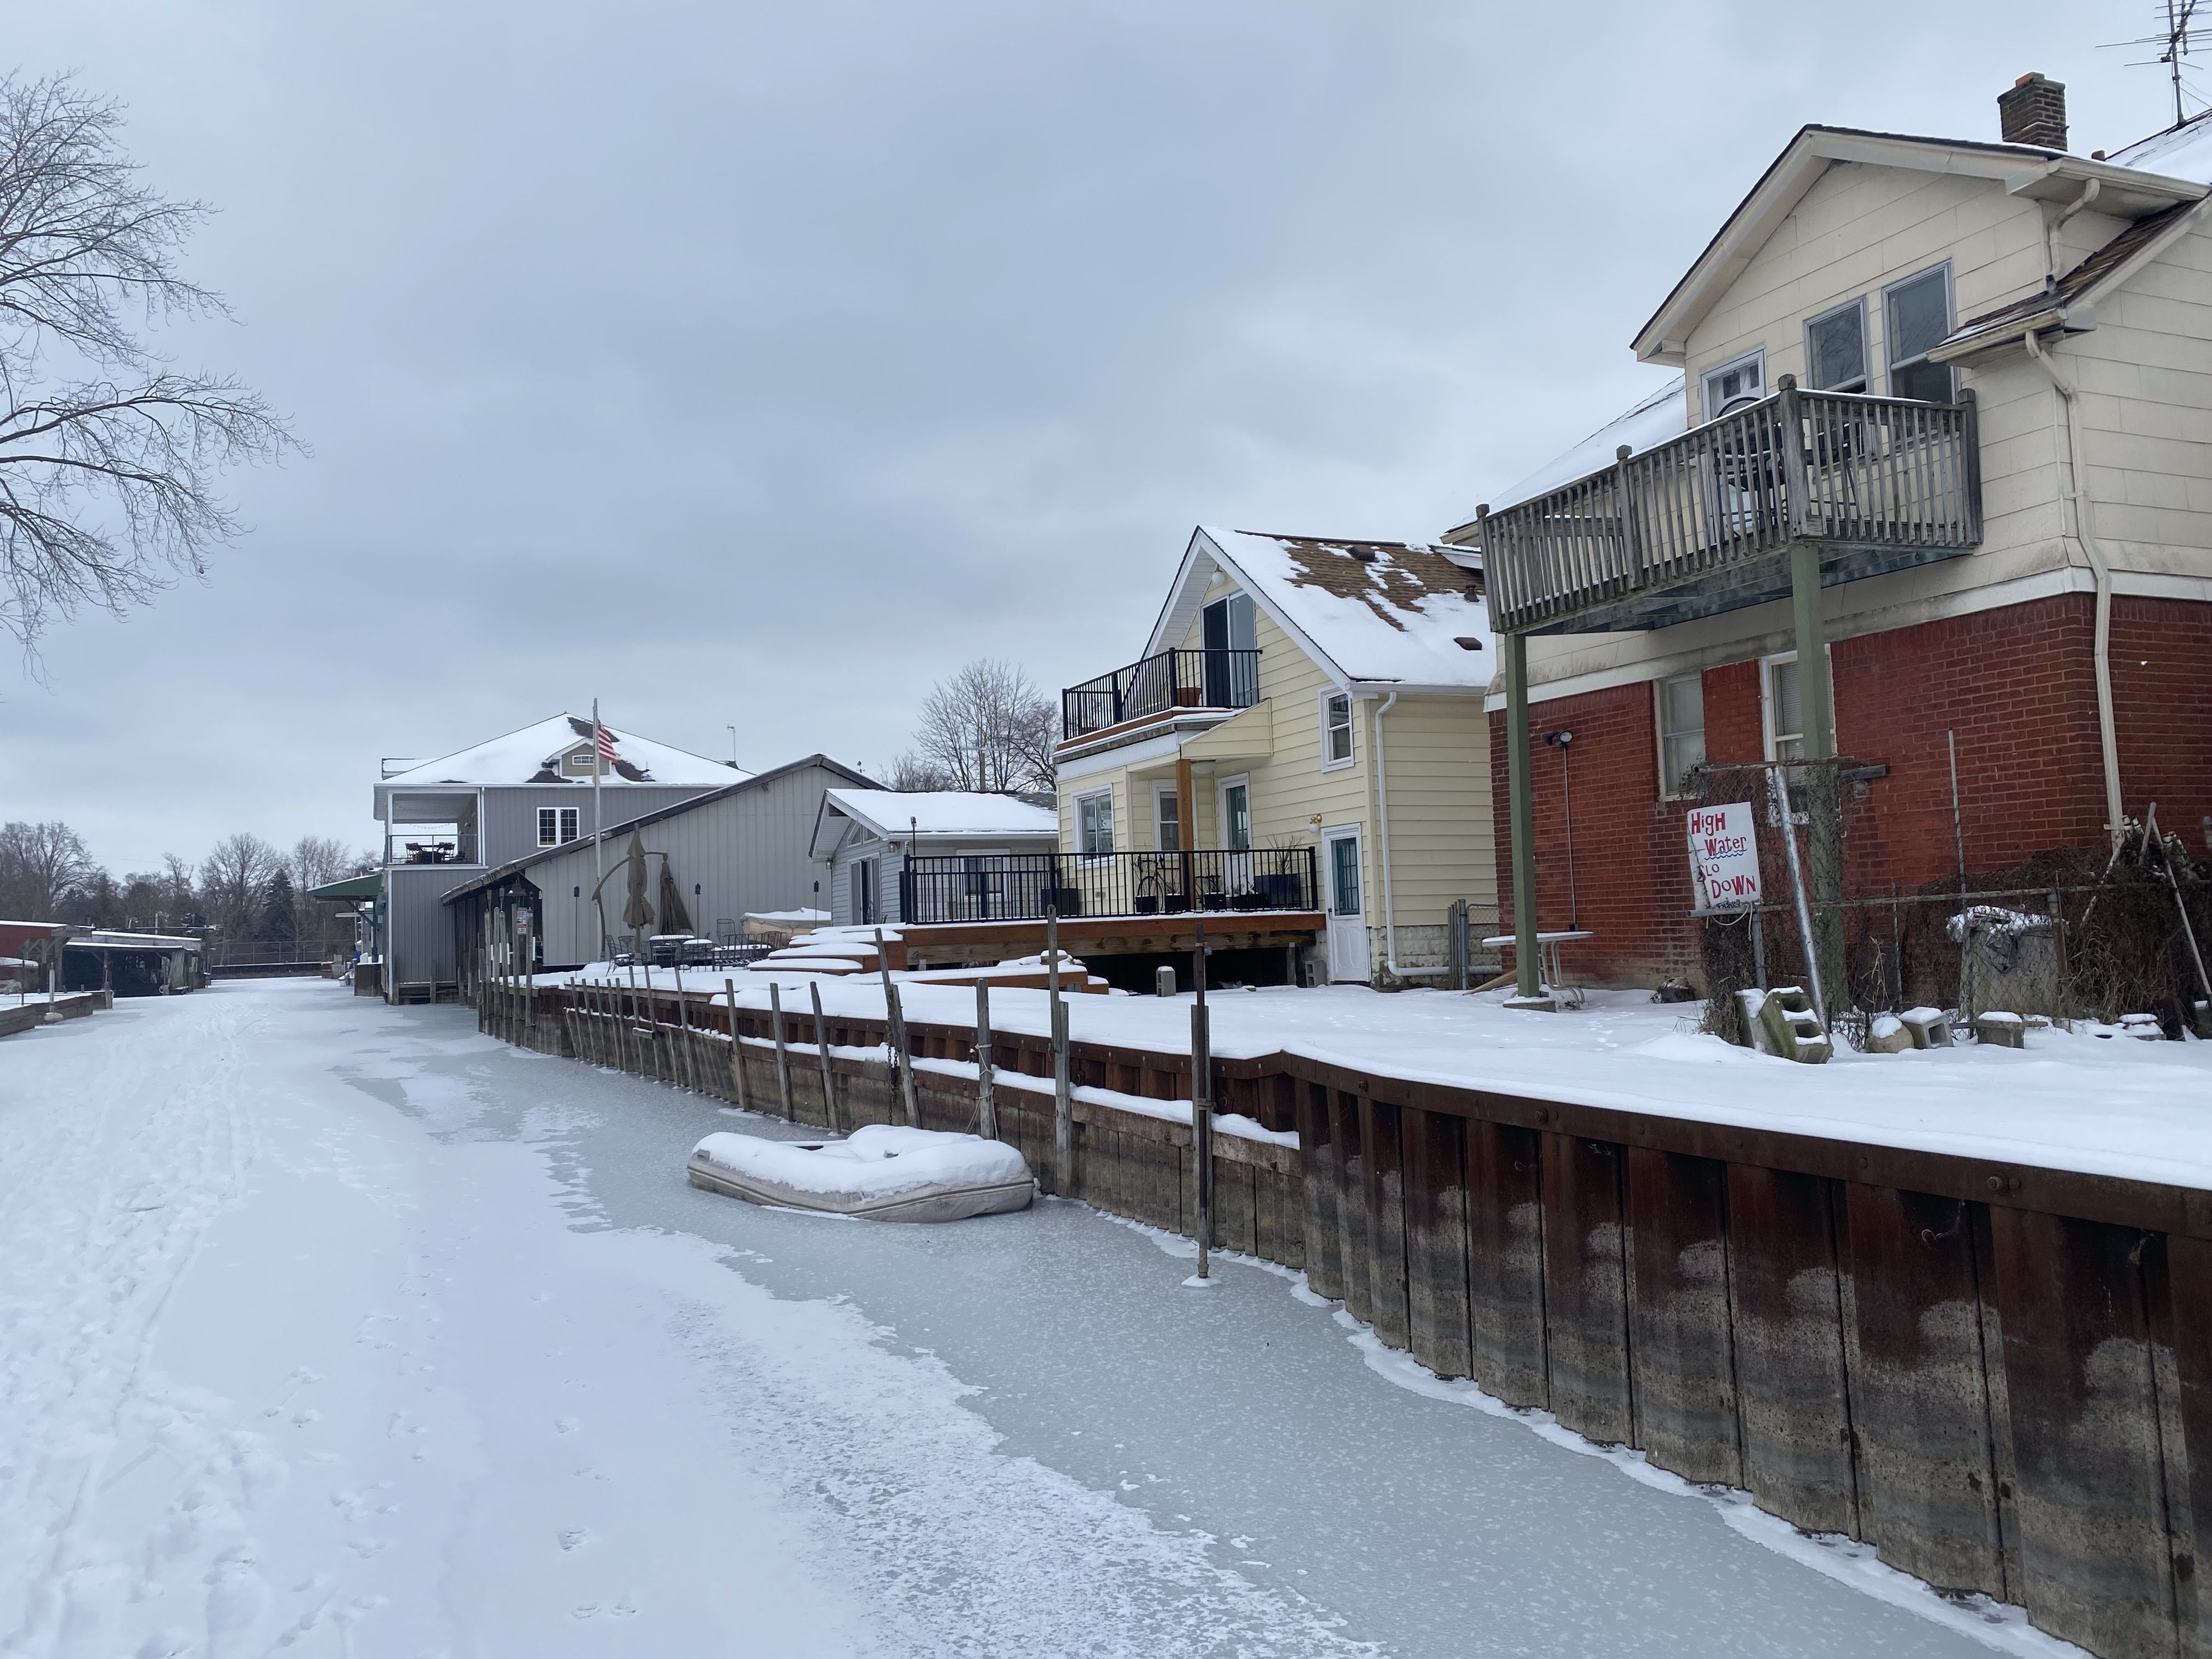 The canals, frozen over, allow someone who walks through a unique perspective. The houses along the canal are seen from the back, with ice covering the canal itself.